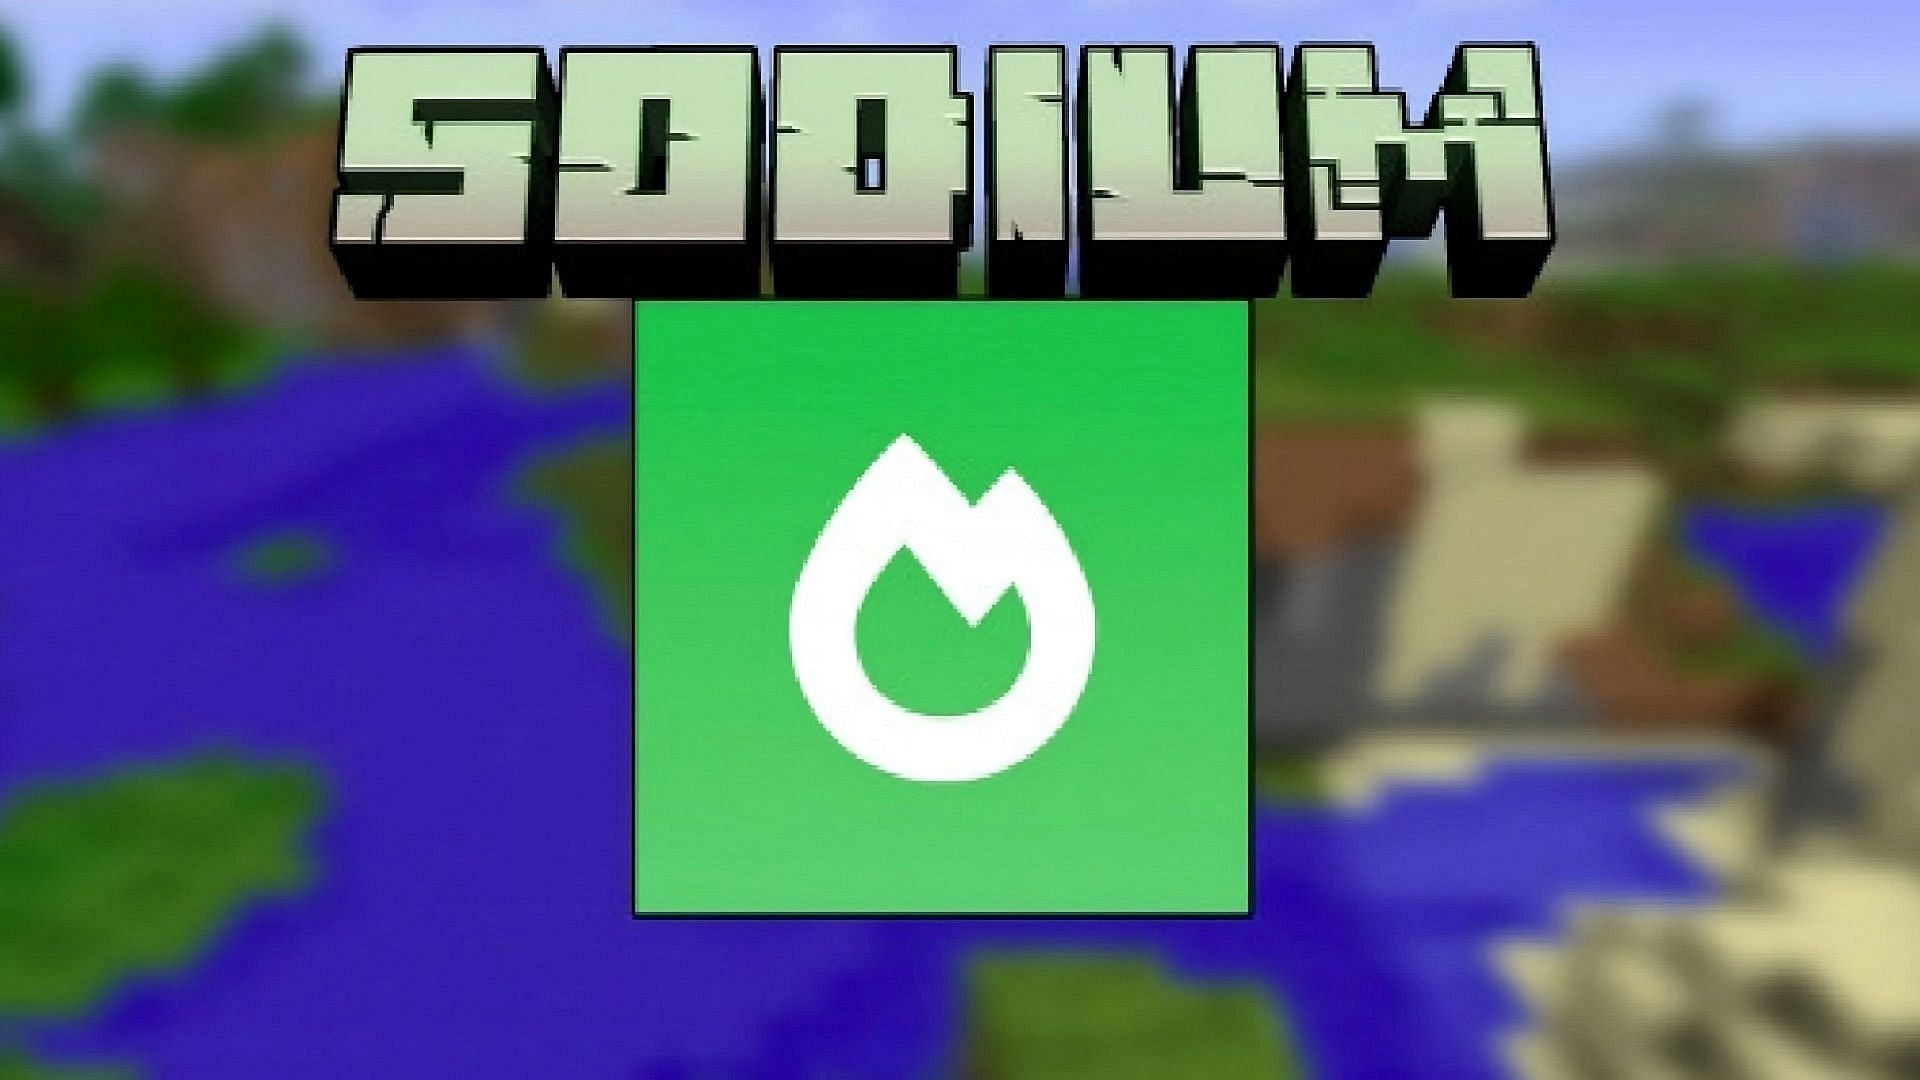 Sodium is another excellent mod option for Minecraft players looking for a performance boost (Image via jellysquid3_/CurseForge)